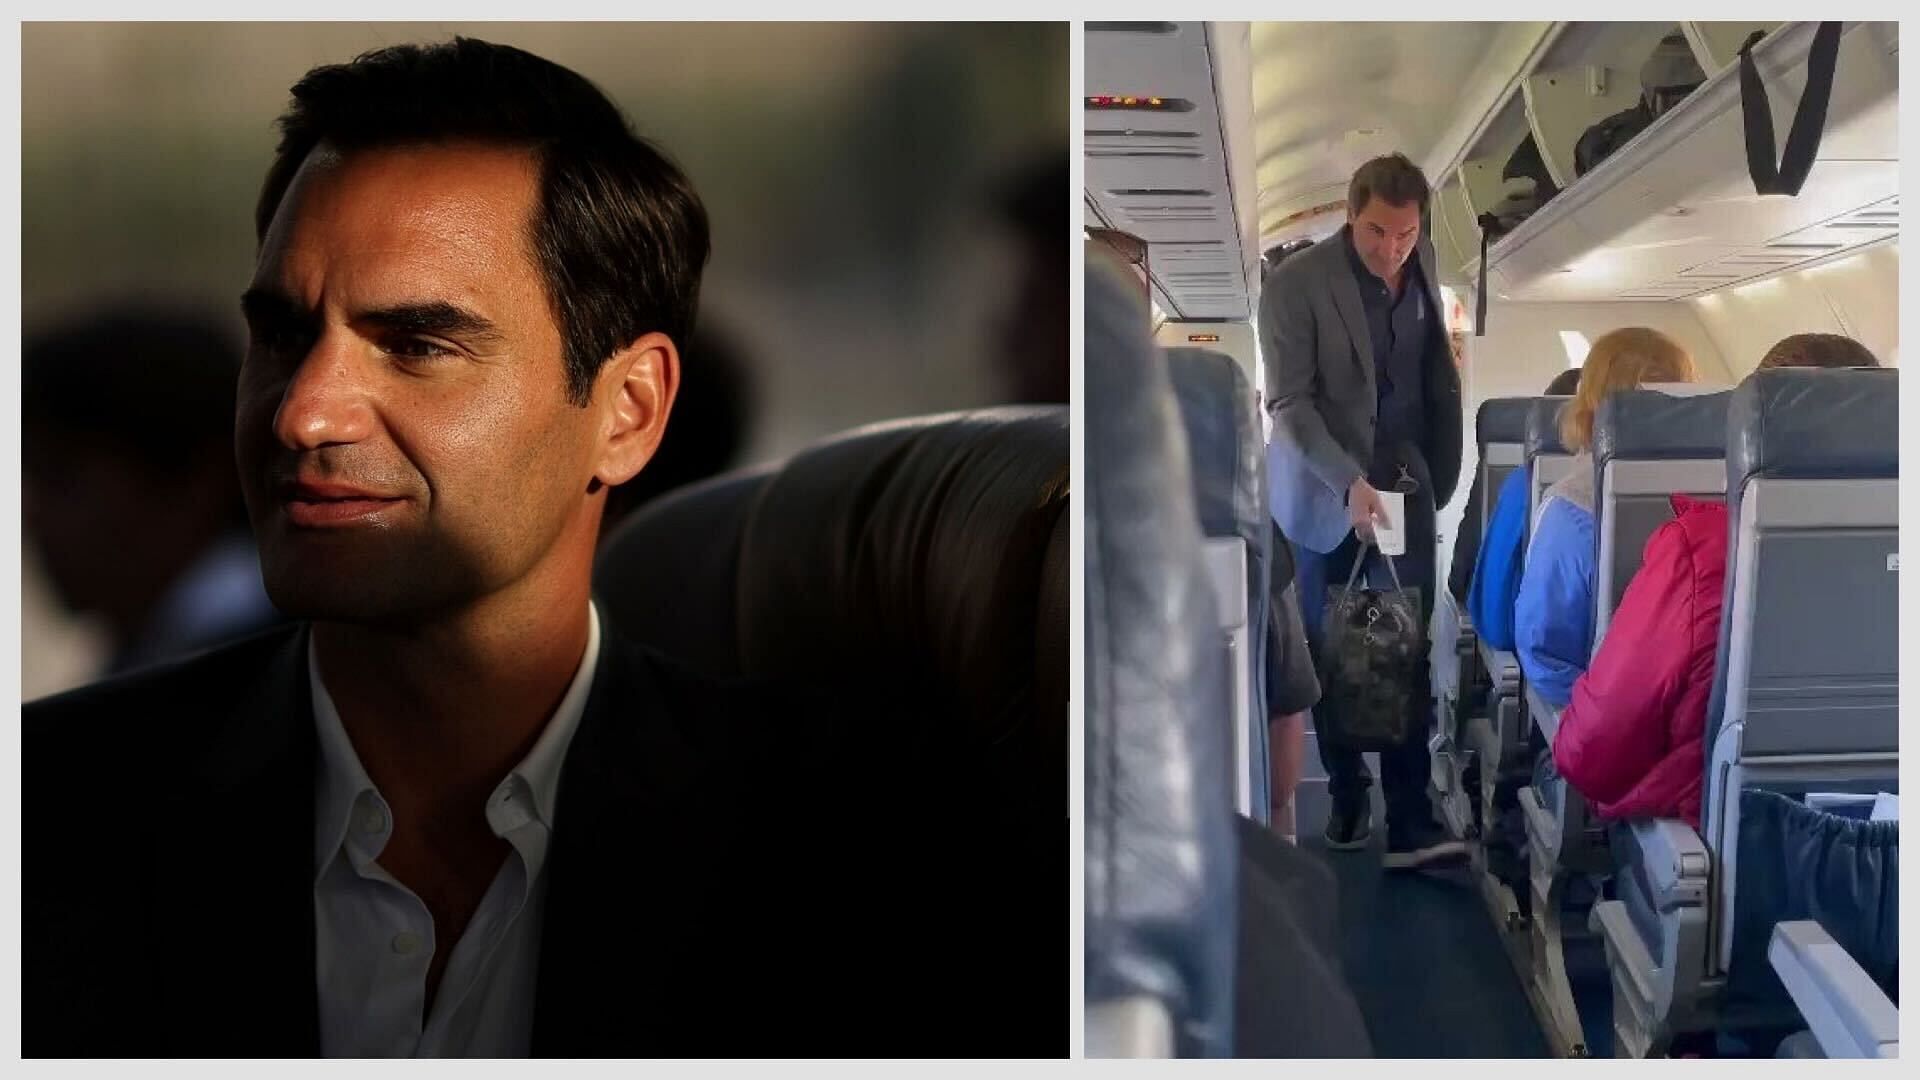 Tennis fans reacted to Roger Federer traveling by economy